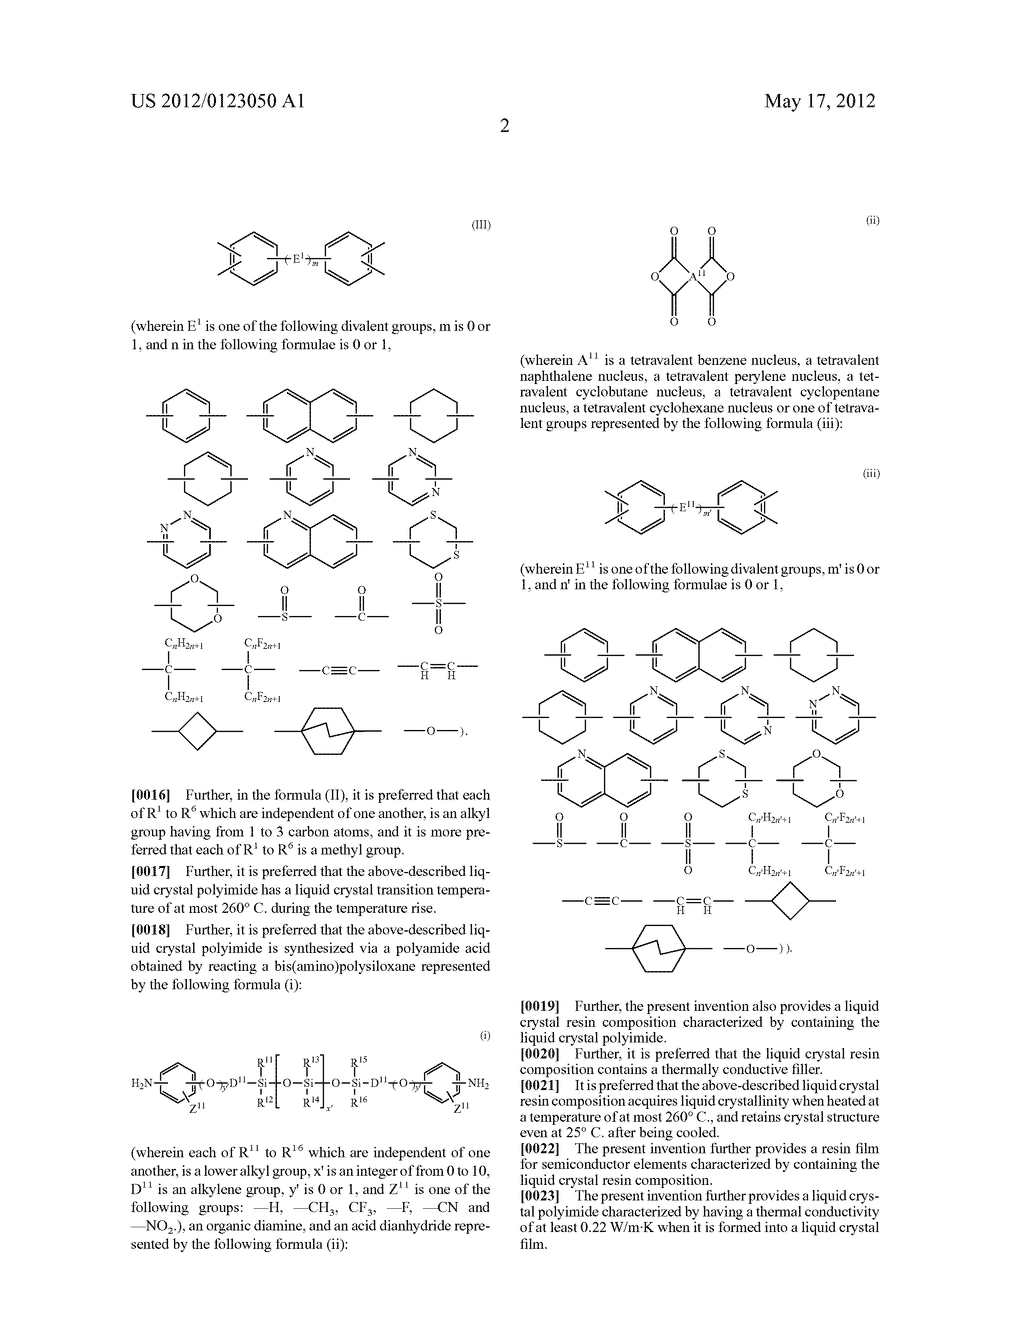 LIQUID CRYSTAL POLYIMIDE, LIQUID CRYSTAL RESIN COMPOSITION CONTAINING     SAME, AND RESIN FILM FOR SEMICONDUCTOR ELEMENTS - diagram, schematic, and image 05